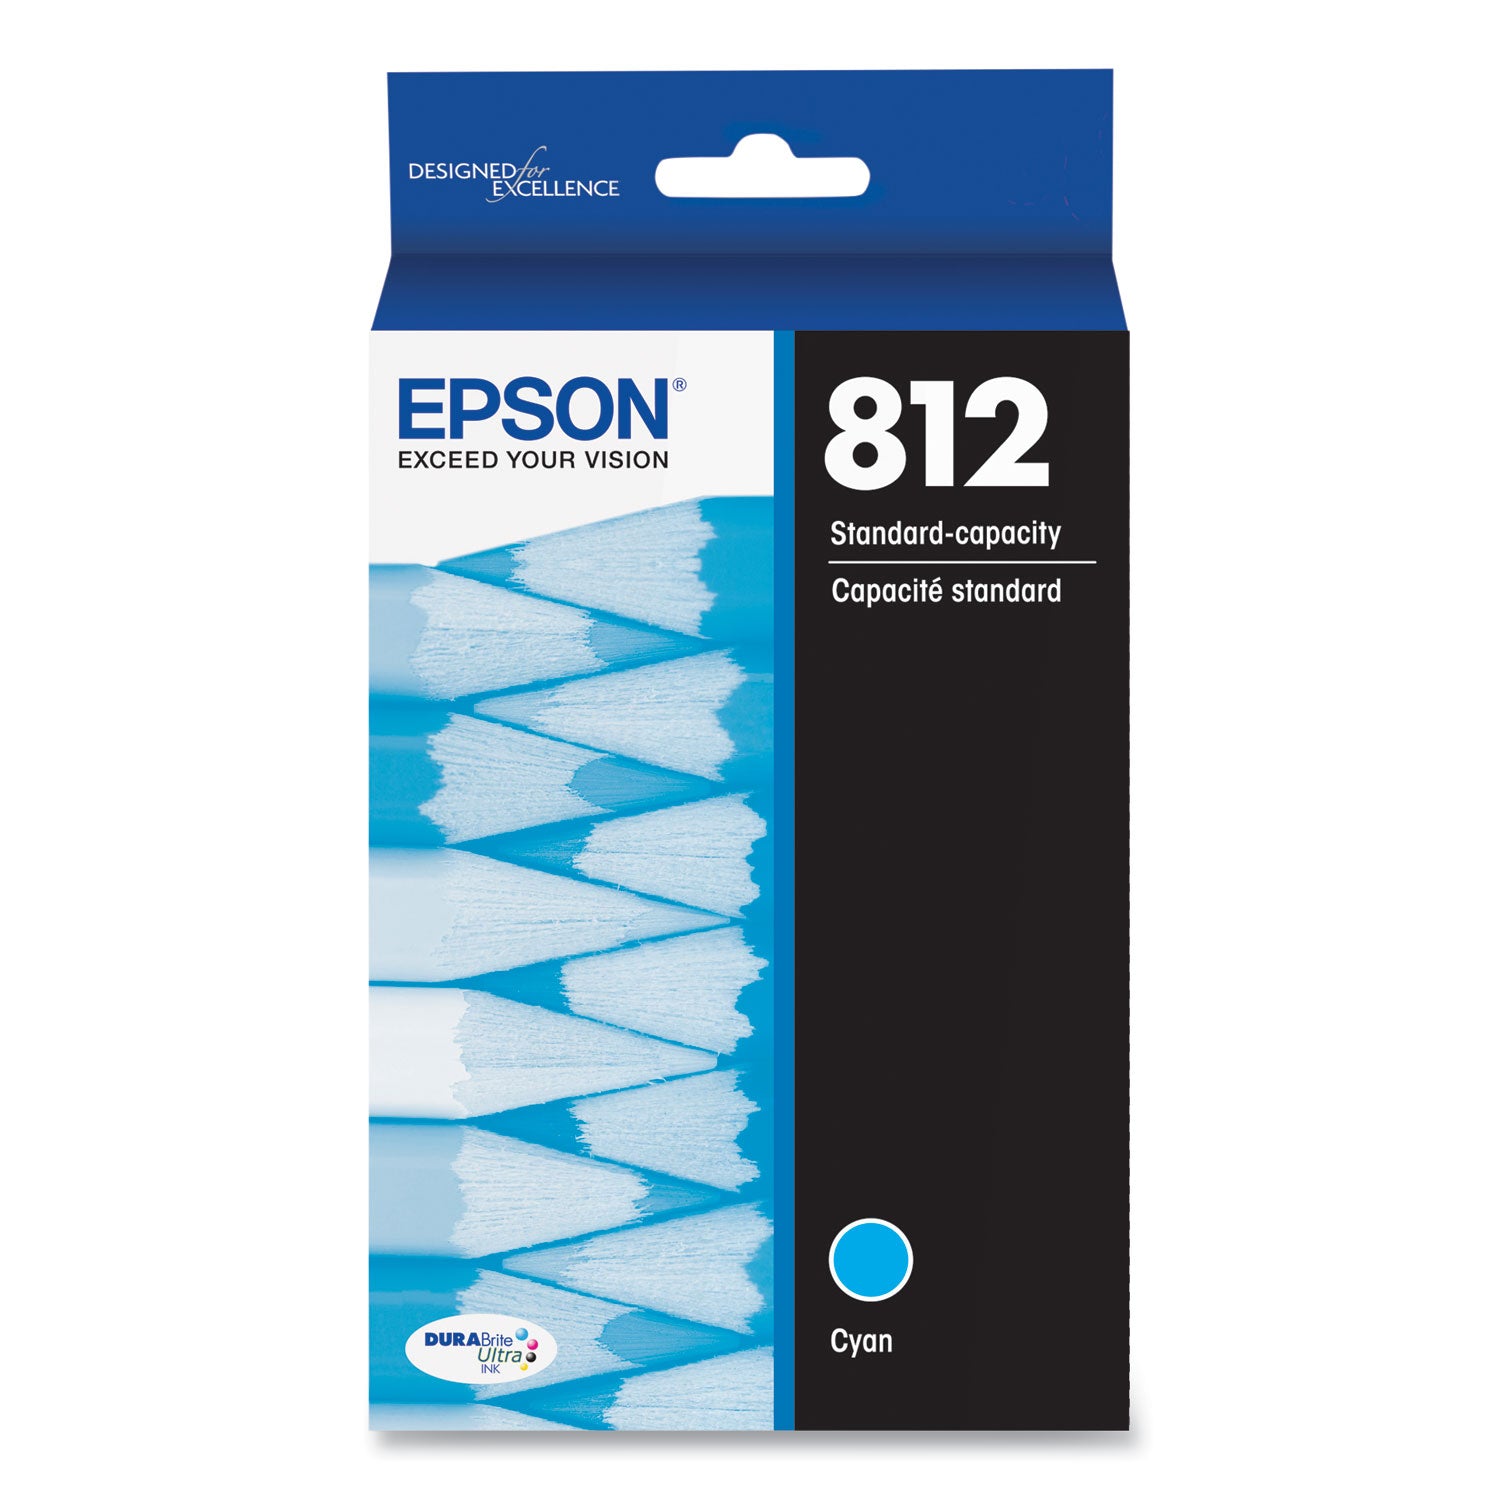 t812220-s-t812-durabrite-ultra-ink-300-page-yield-cyan_epst812220s - 1